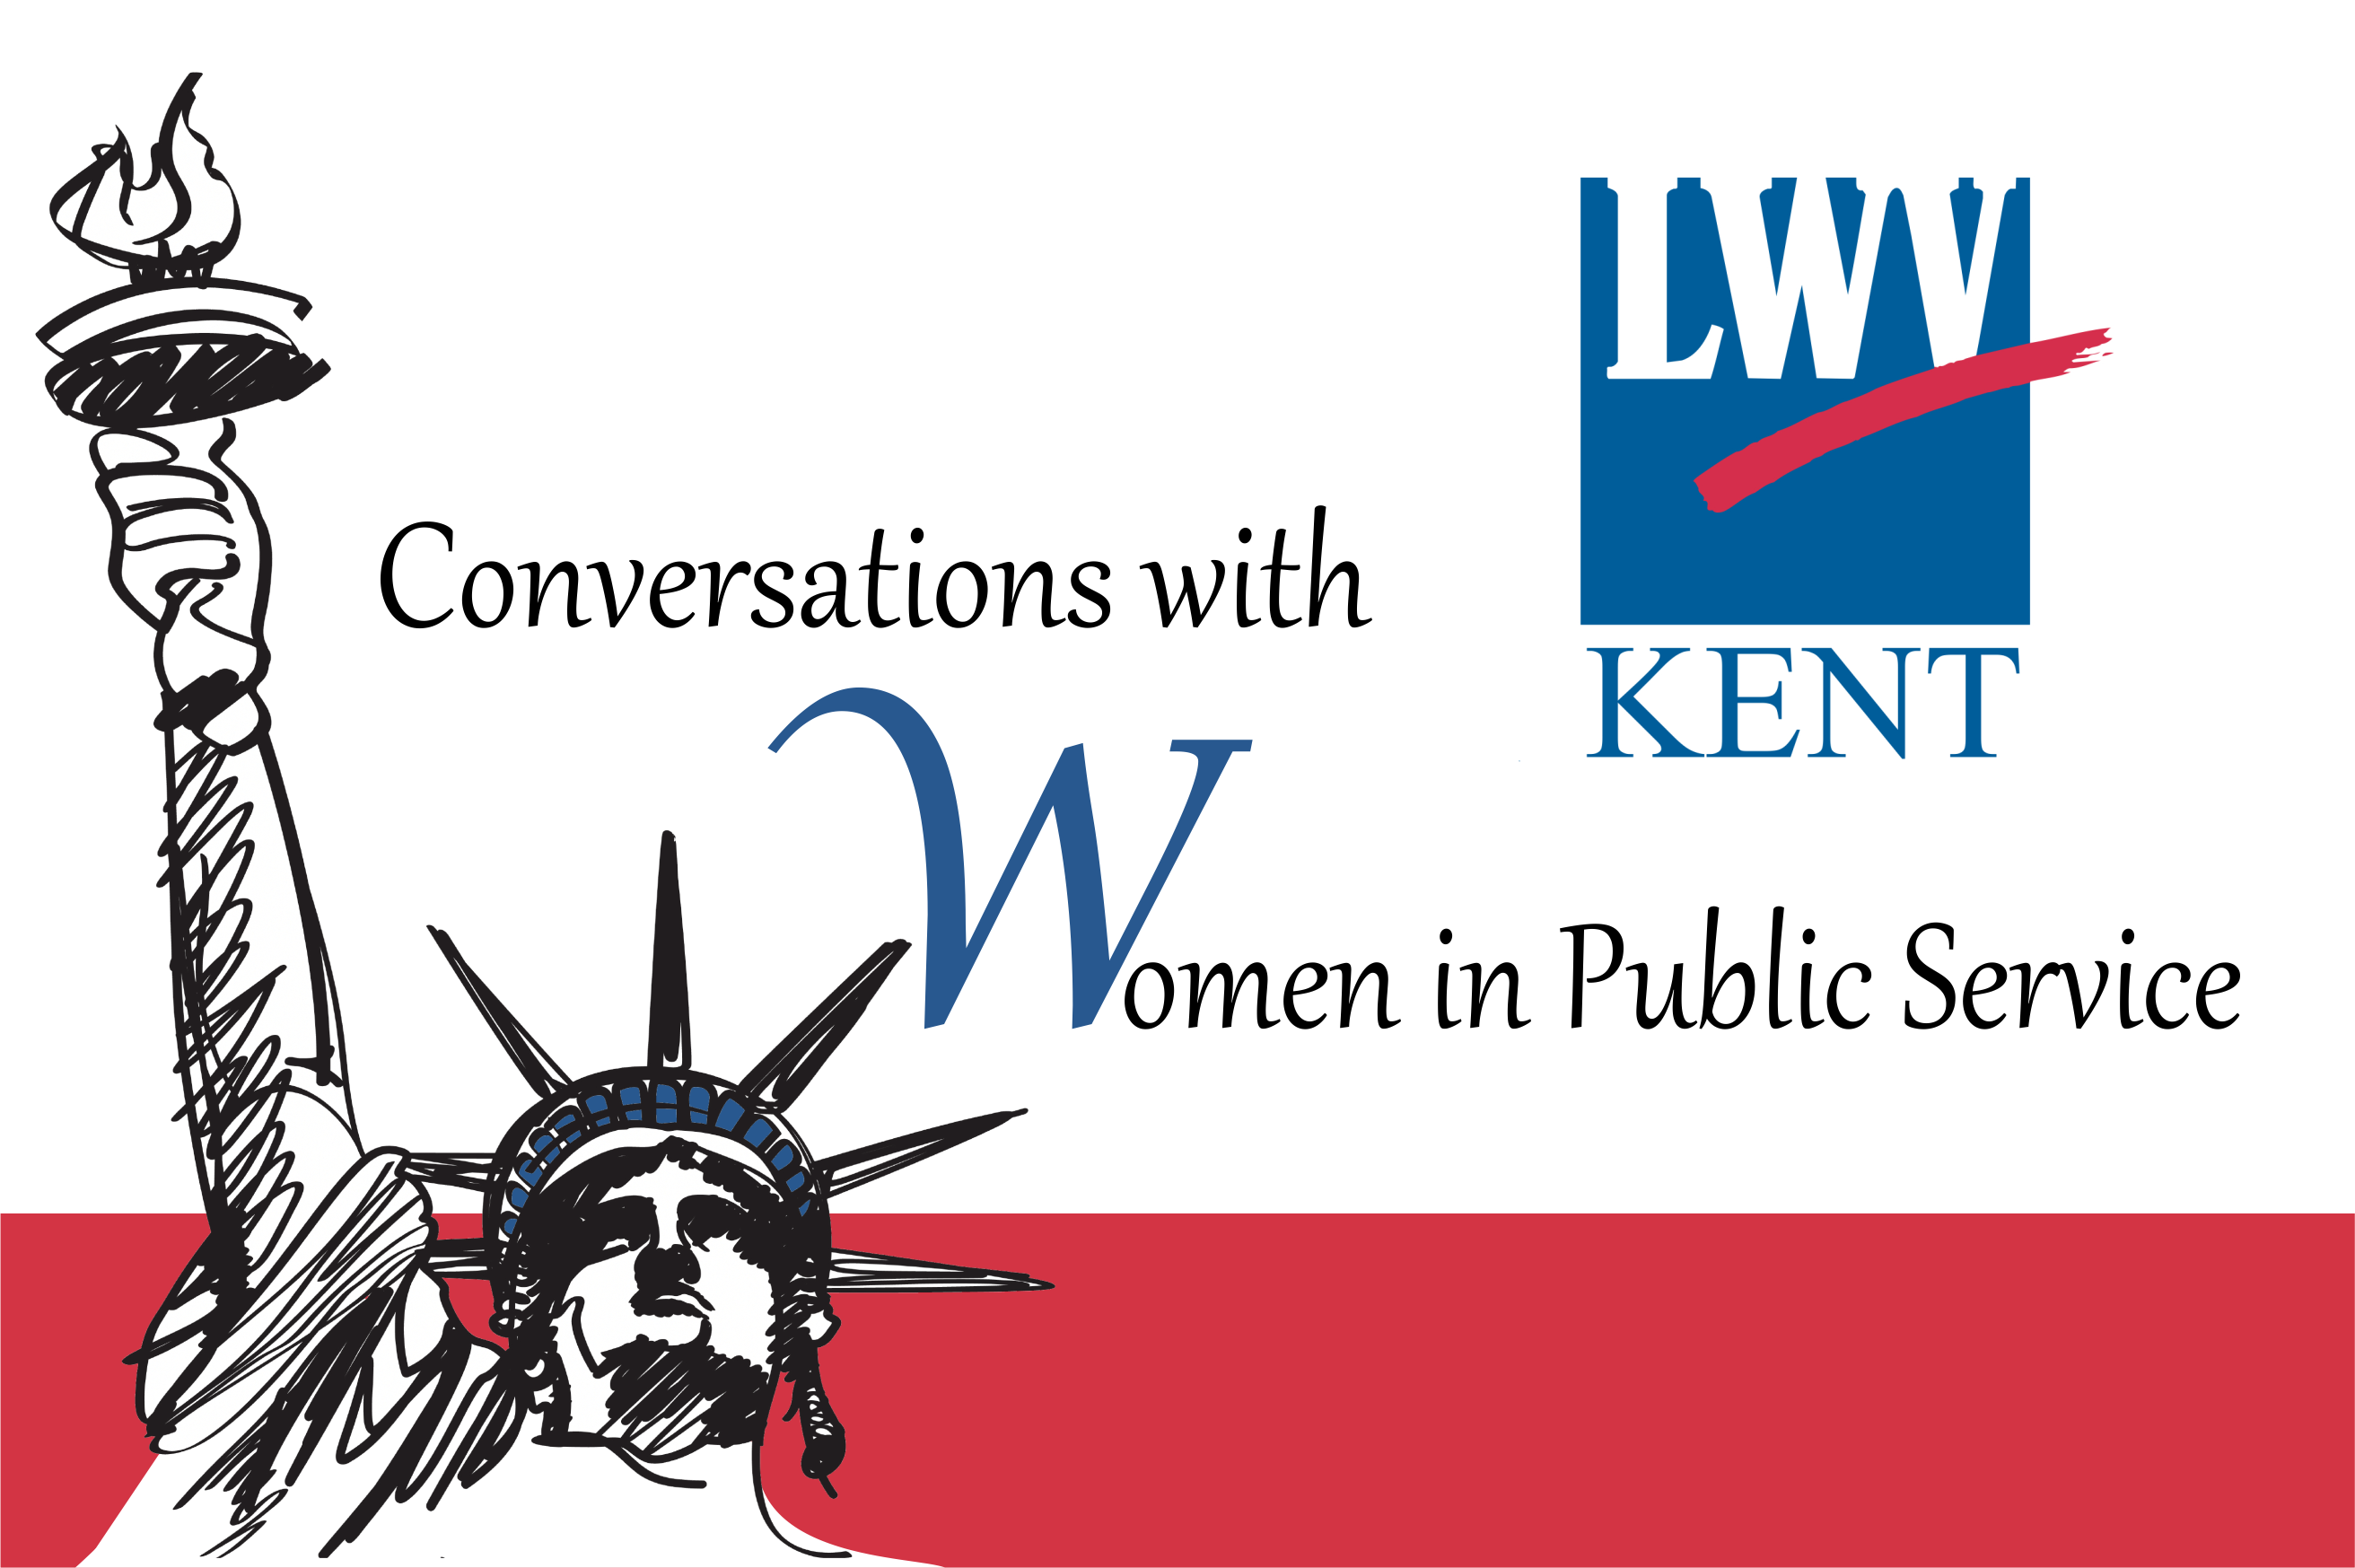 Conversations with Women in Public Service image